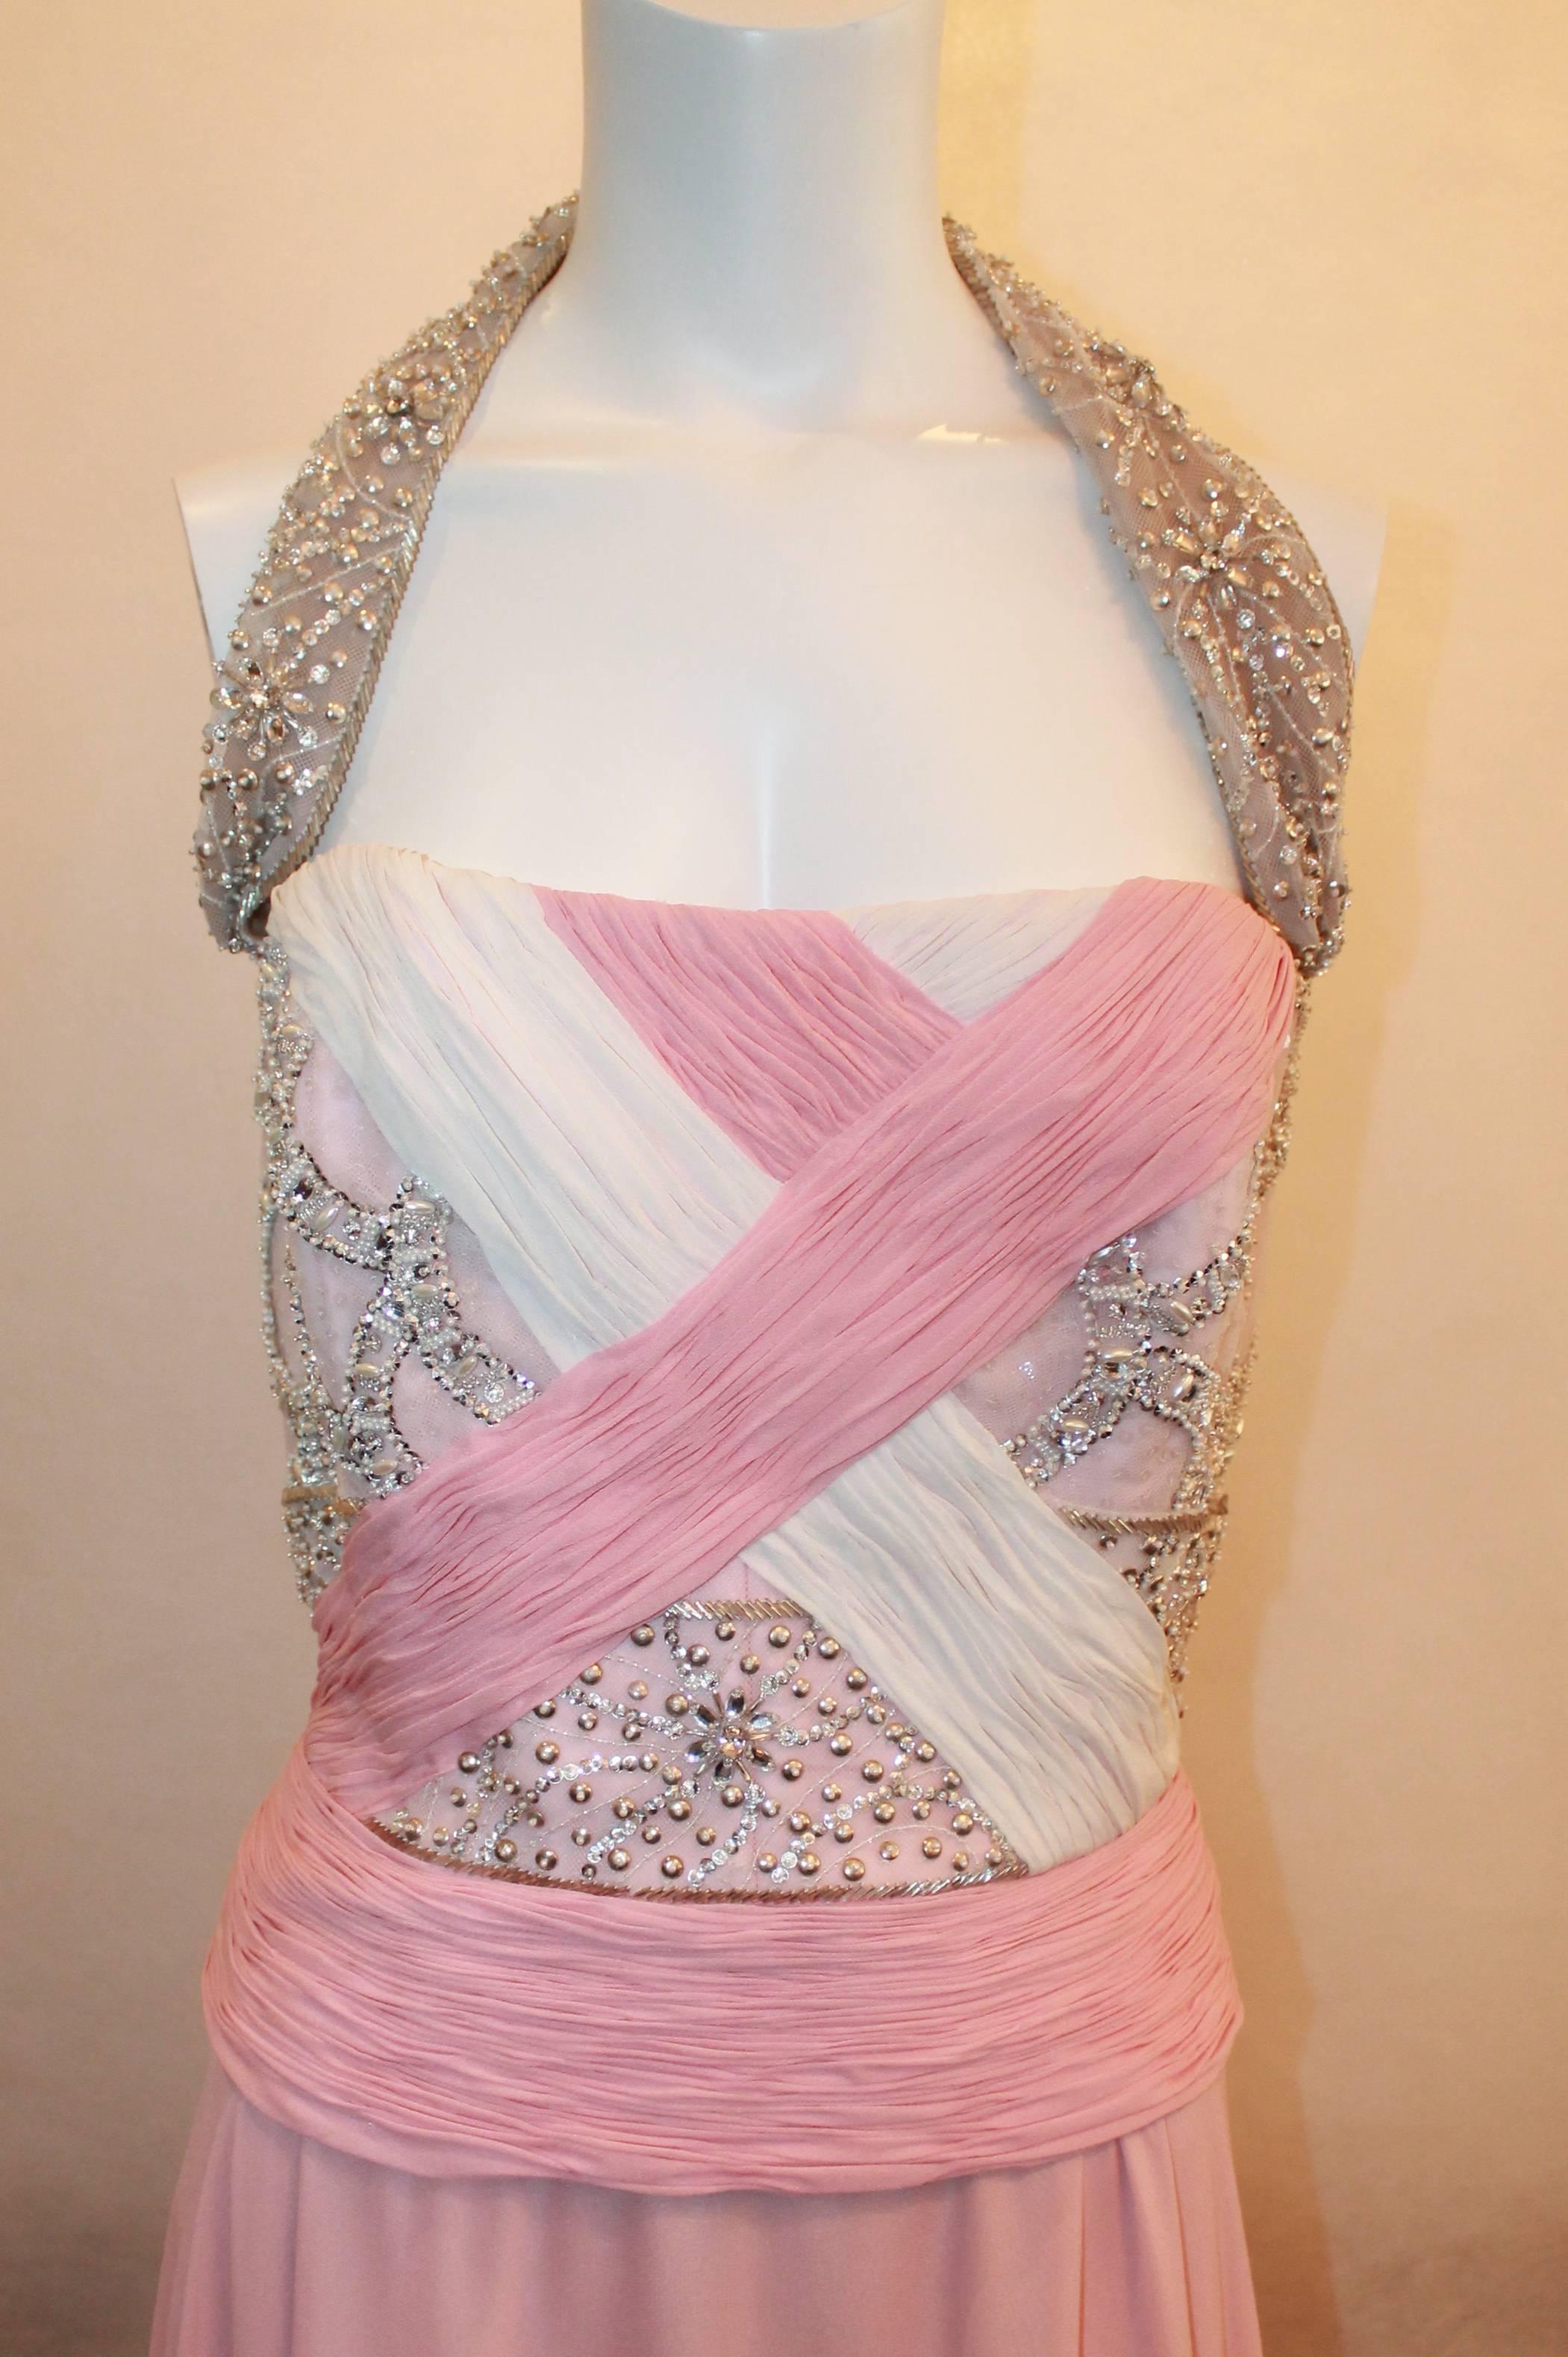 Bill Blass Pink Silk Chiffon & Mesh Gown w/ Beading - 10.  This gorgeous gown is in very good condition with only minor wear consistent with its age.  it features elegant pink silk chiffon and mesh fabrics, a striking beaded halter neckline, an